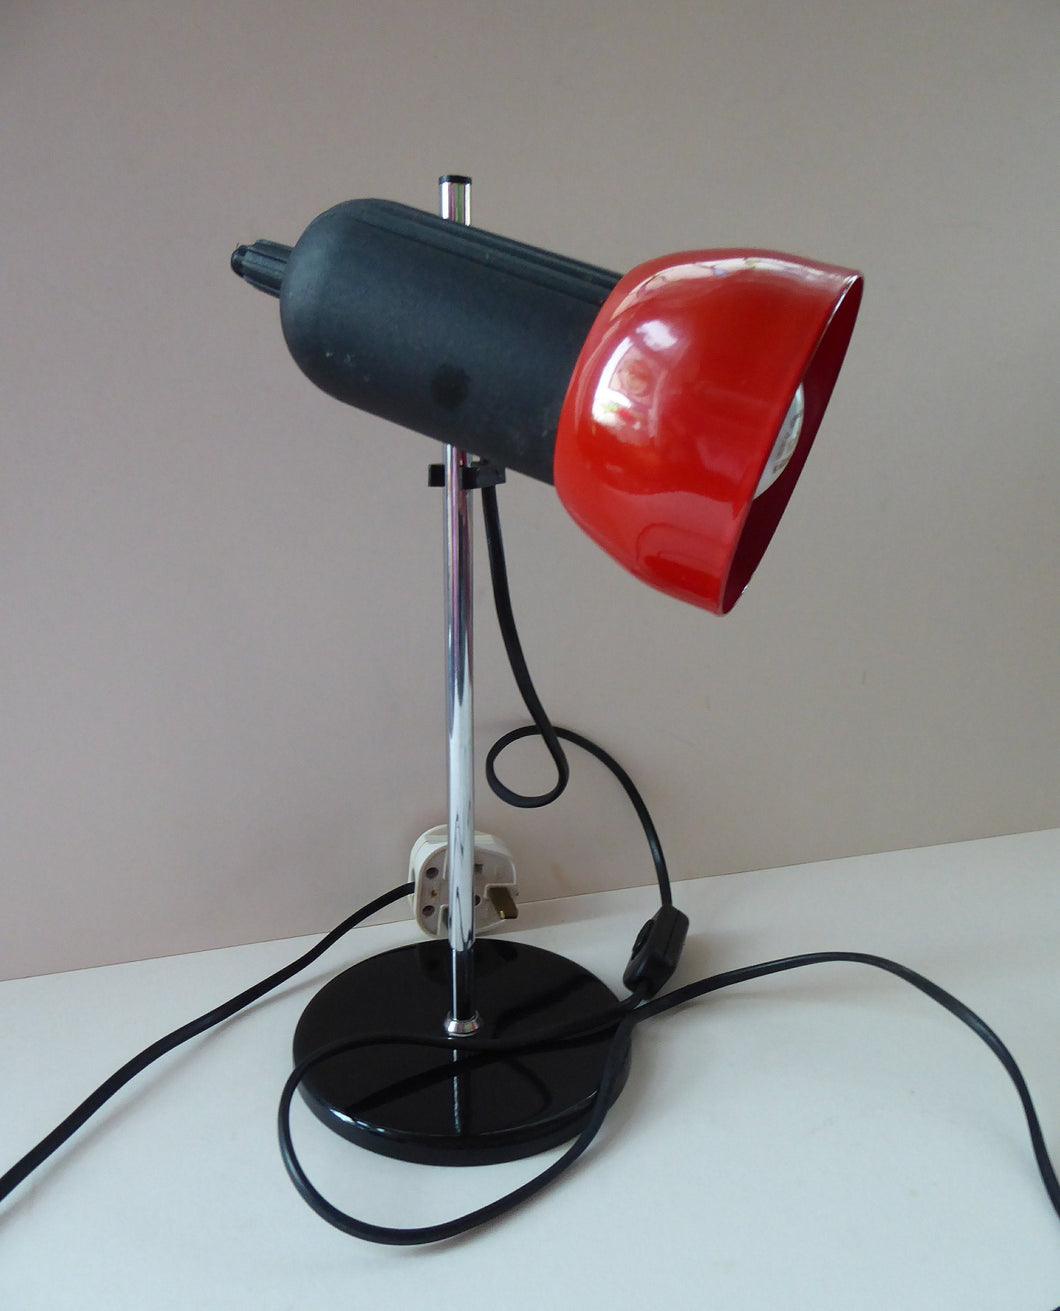 VINTAGE 1970s / 1980s  Red Enamel Metal Desk Lamp with Finger Switch. Good Condition